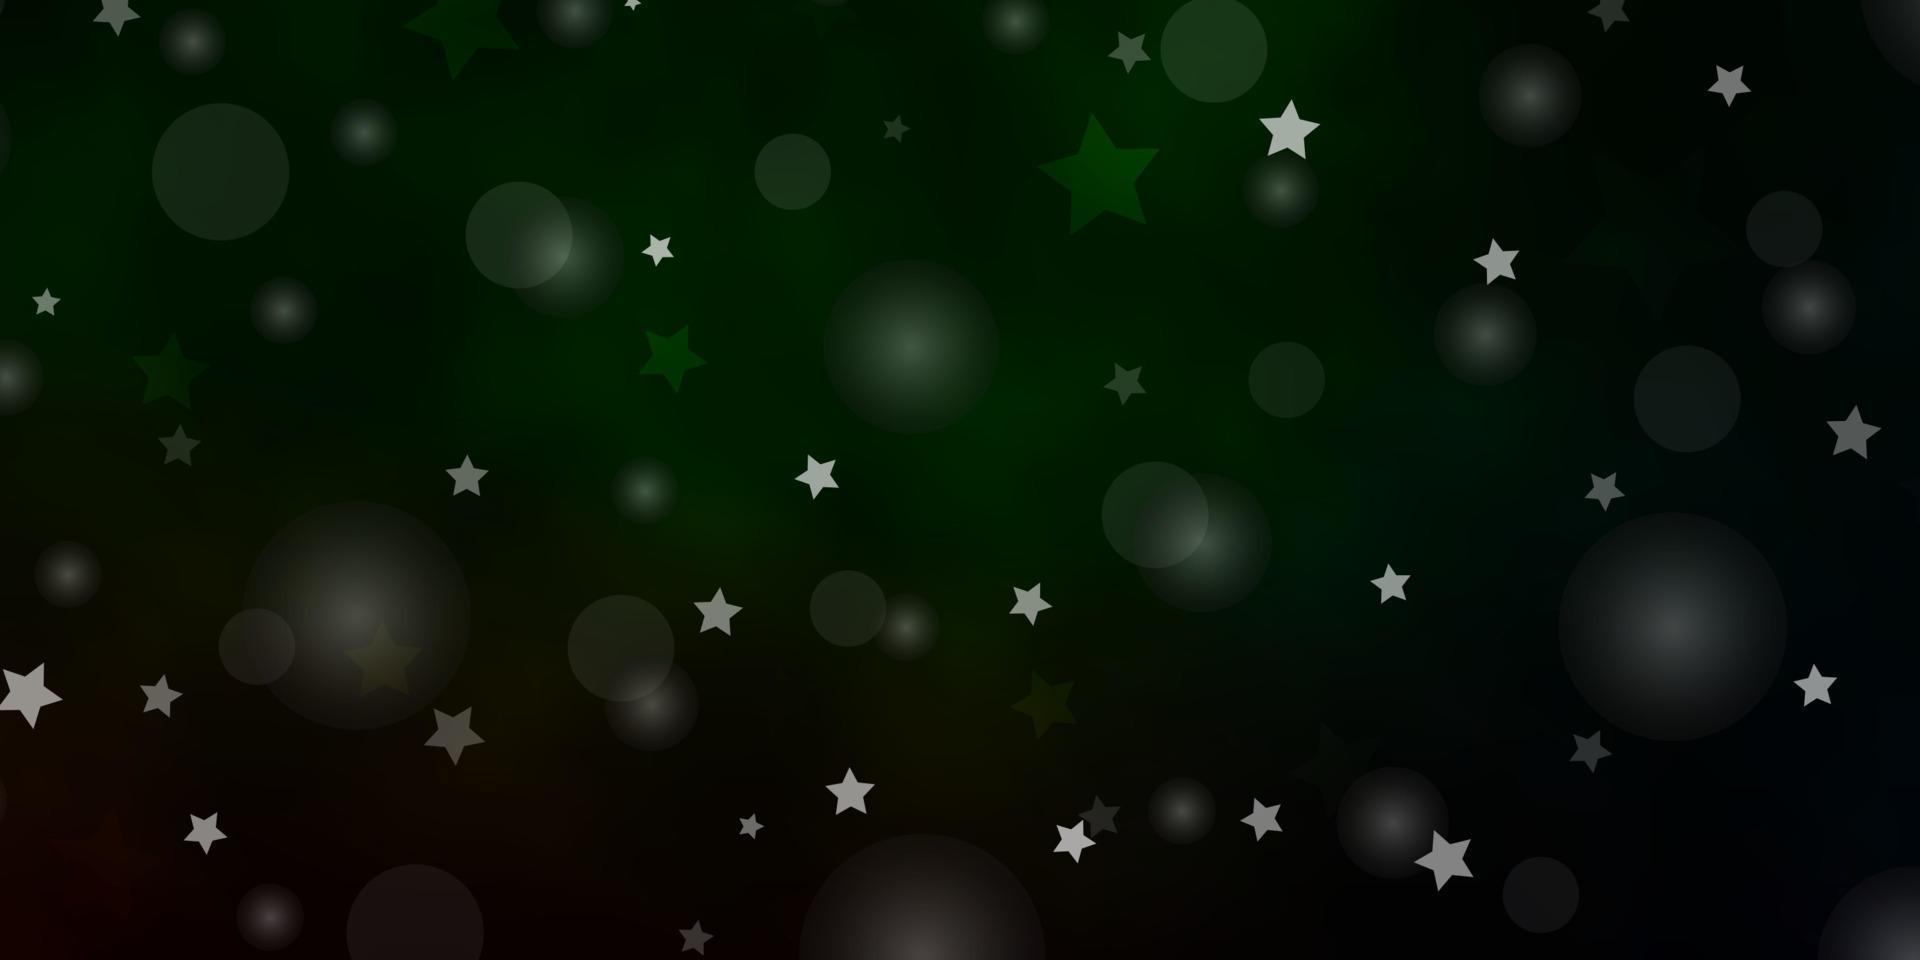 Dark Green vector background with circles, stars.